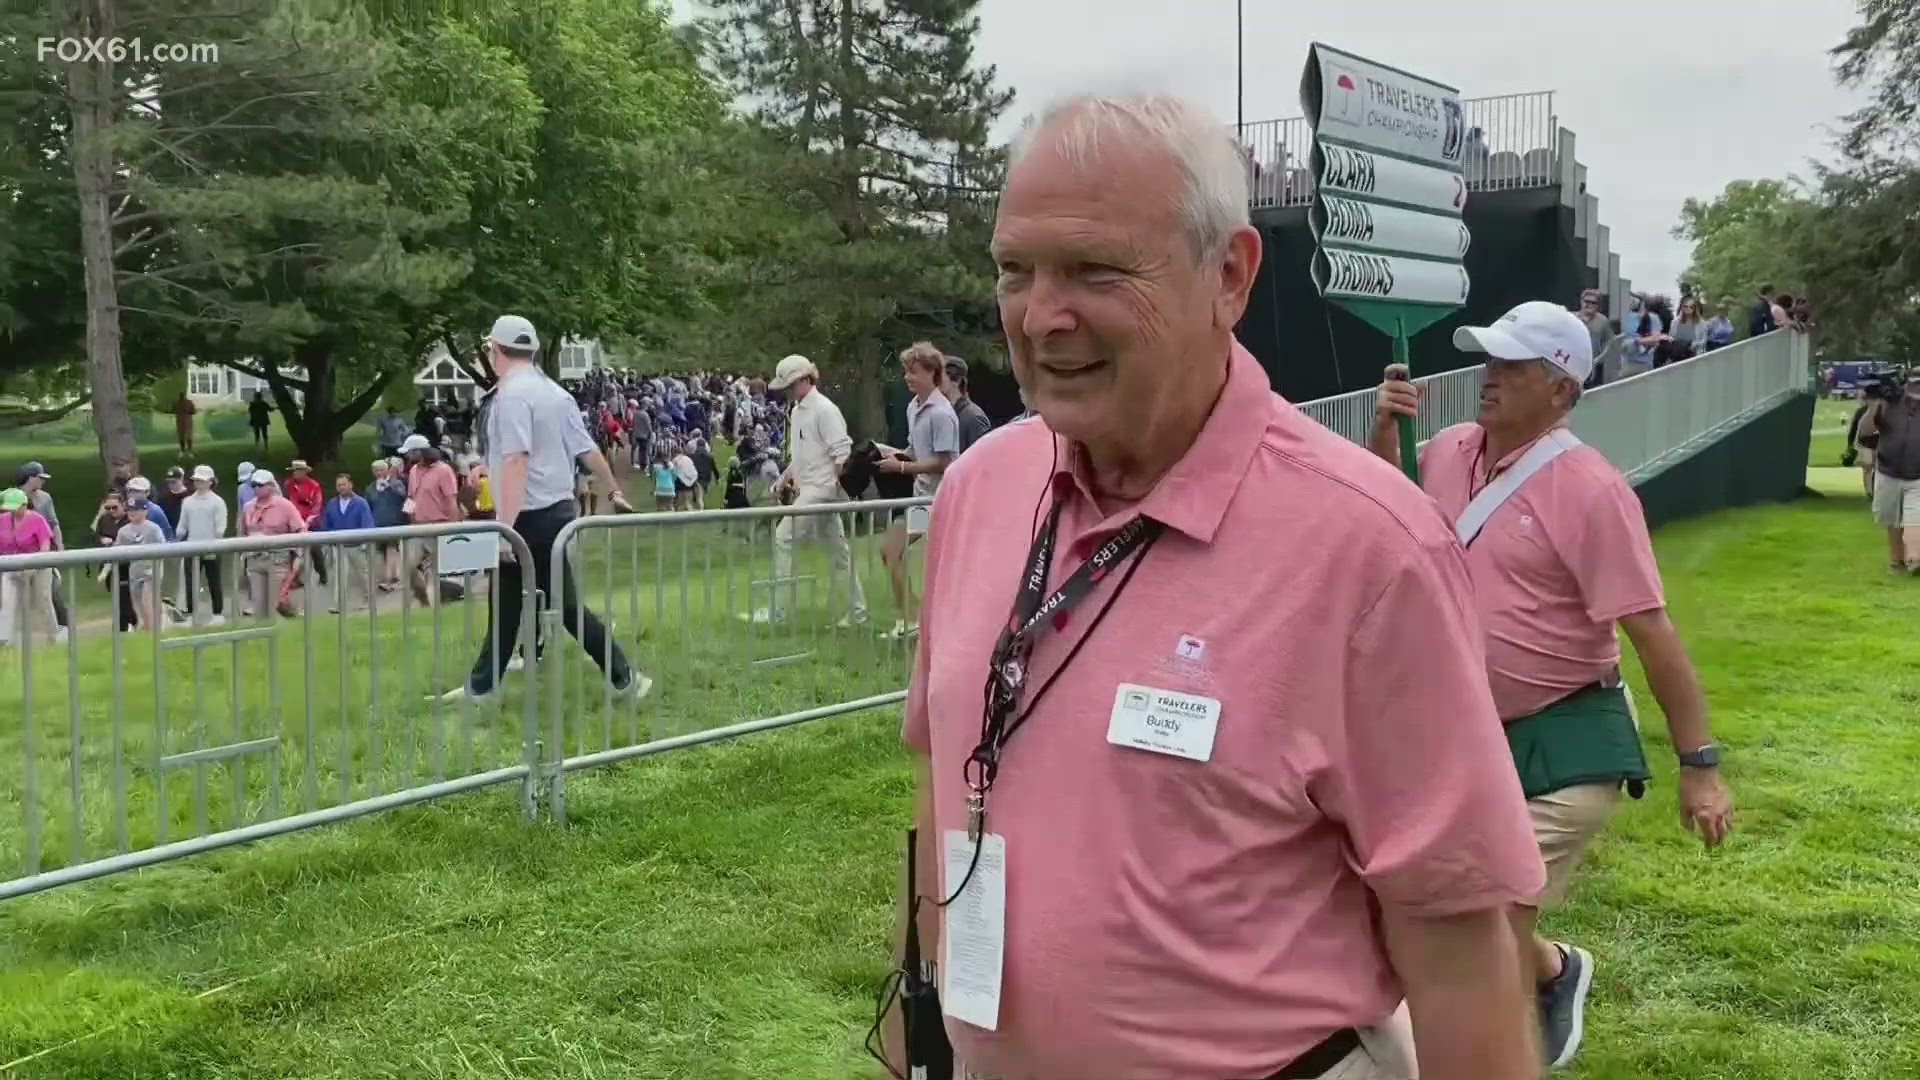 PGA Tour Volunteer of the Year a fixture at the Travelers Championship fox61